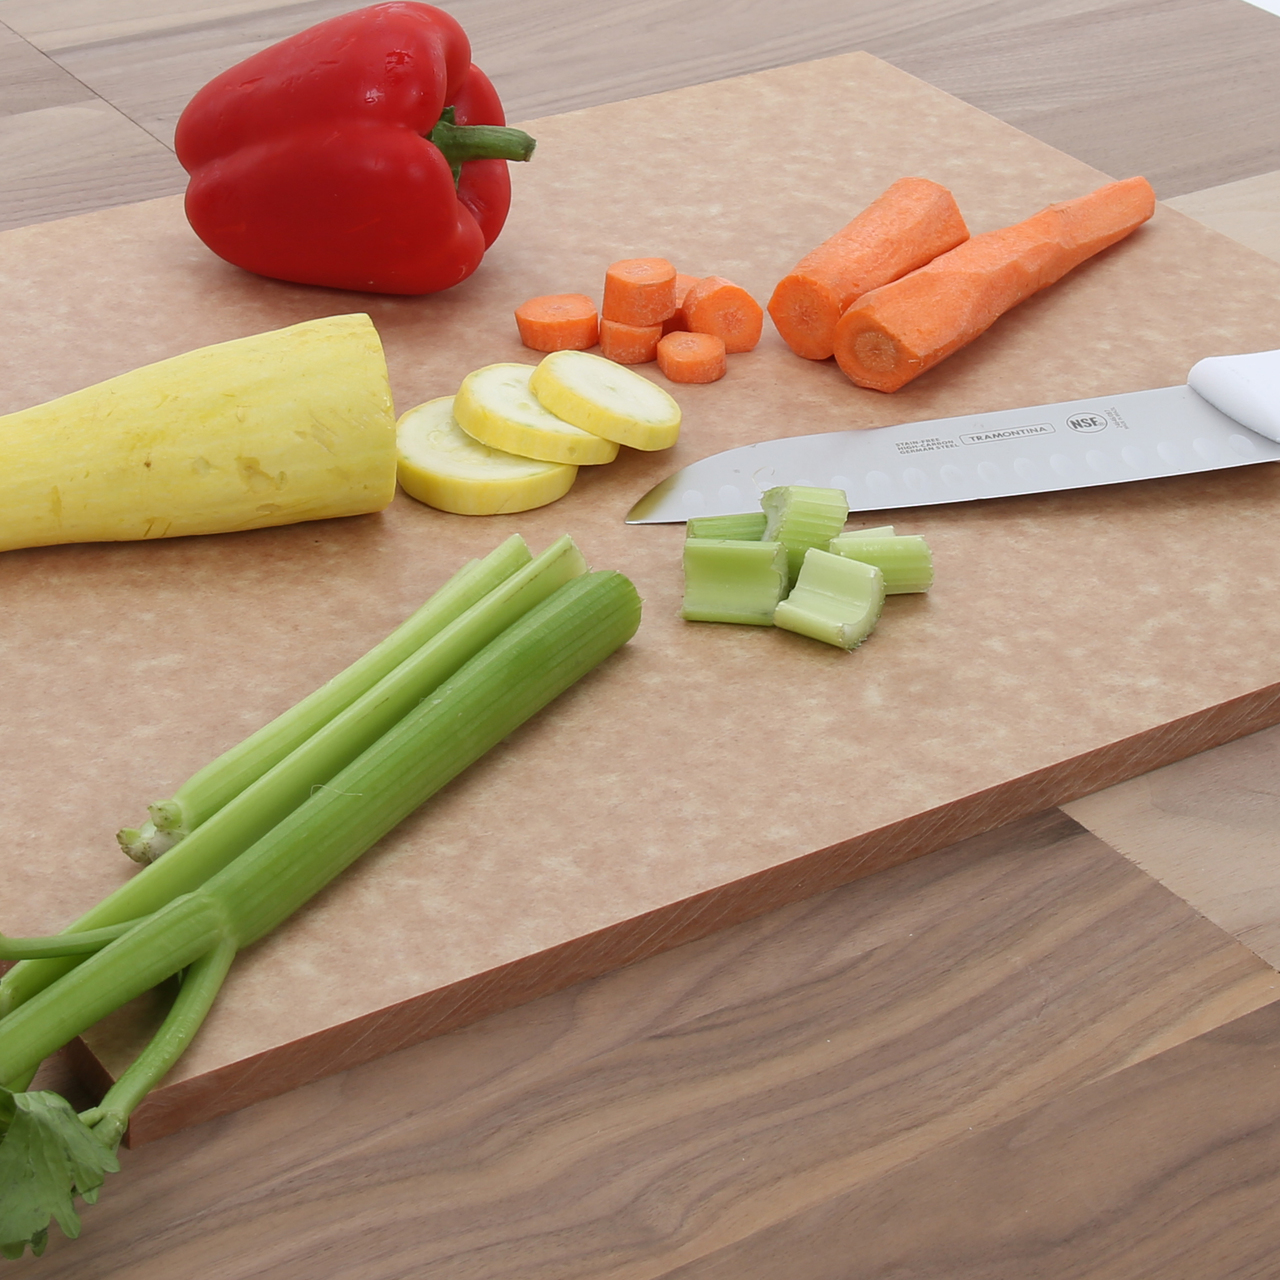 15 x 20 Cutting Board Set of 6 - Cutting Board Company - Commercial Quality  Plastic and Richlite Custom Sized Cutting Boards